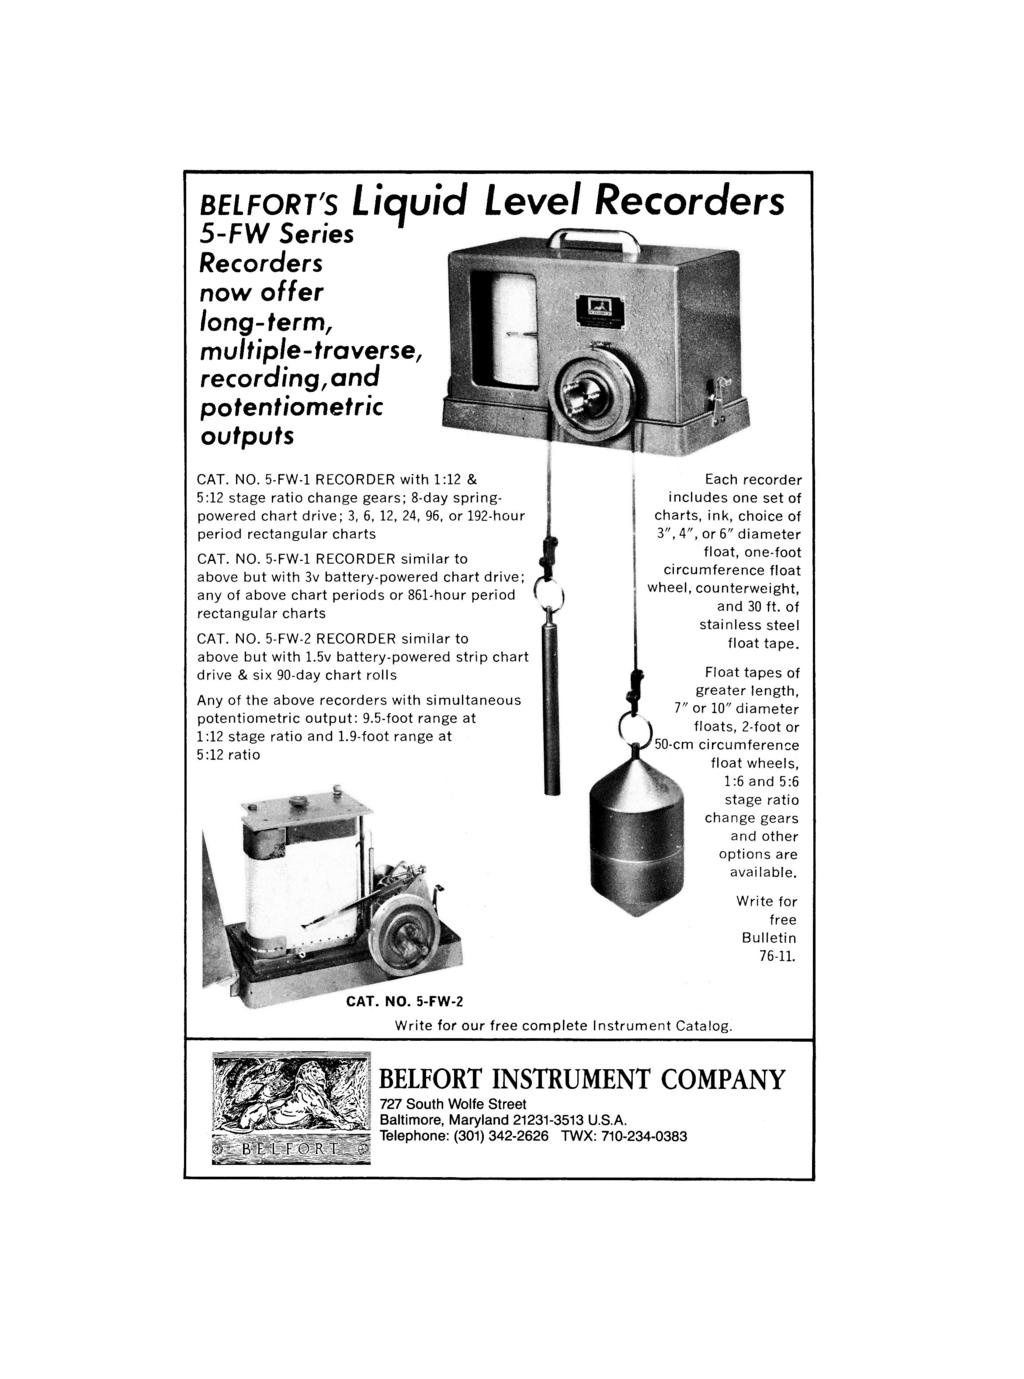 BELFORT'S Liquid Level 5-FW Series ' Recorders now offer long-term, multiple-traverse, recording,and potentiometric outputs CAT. NO.